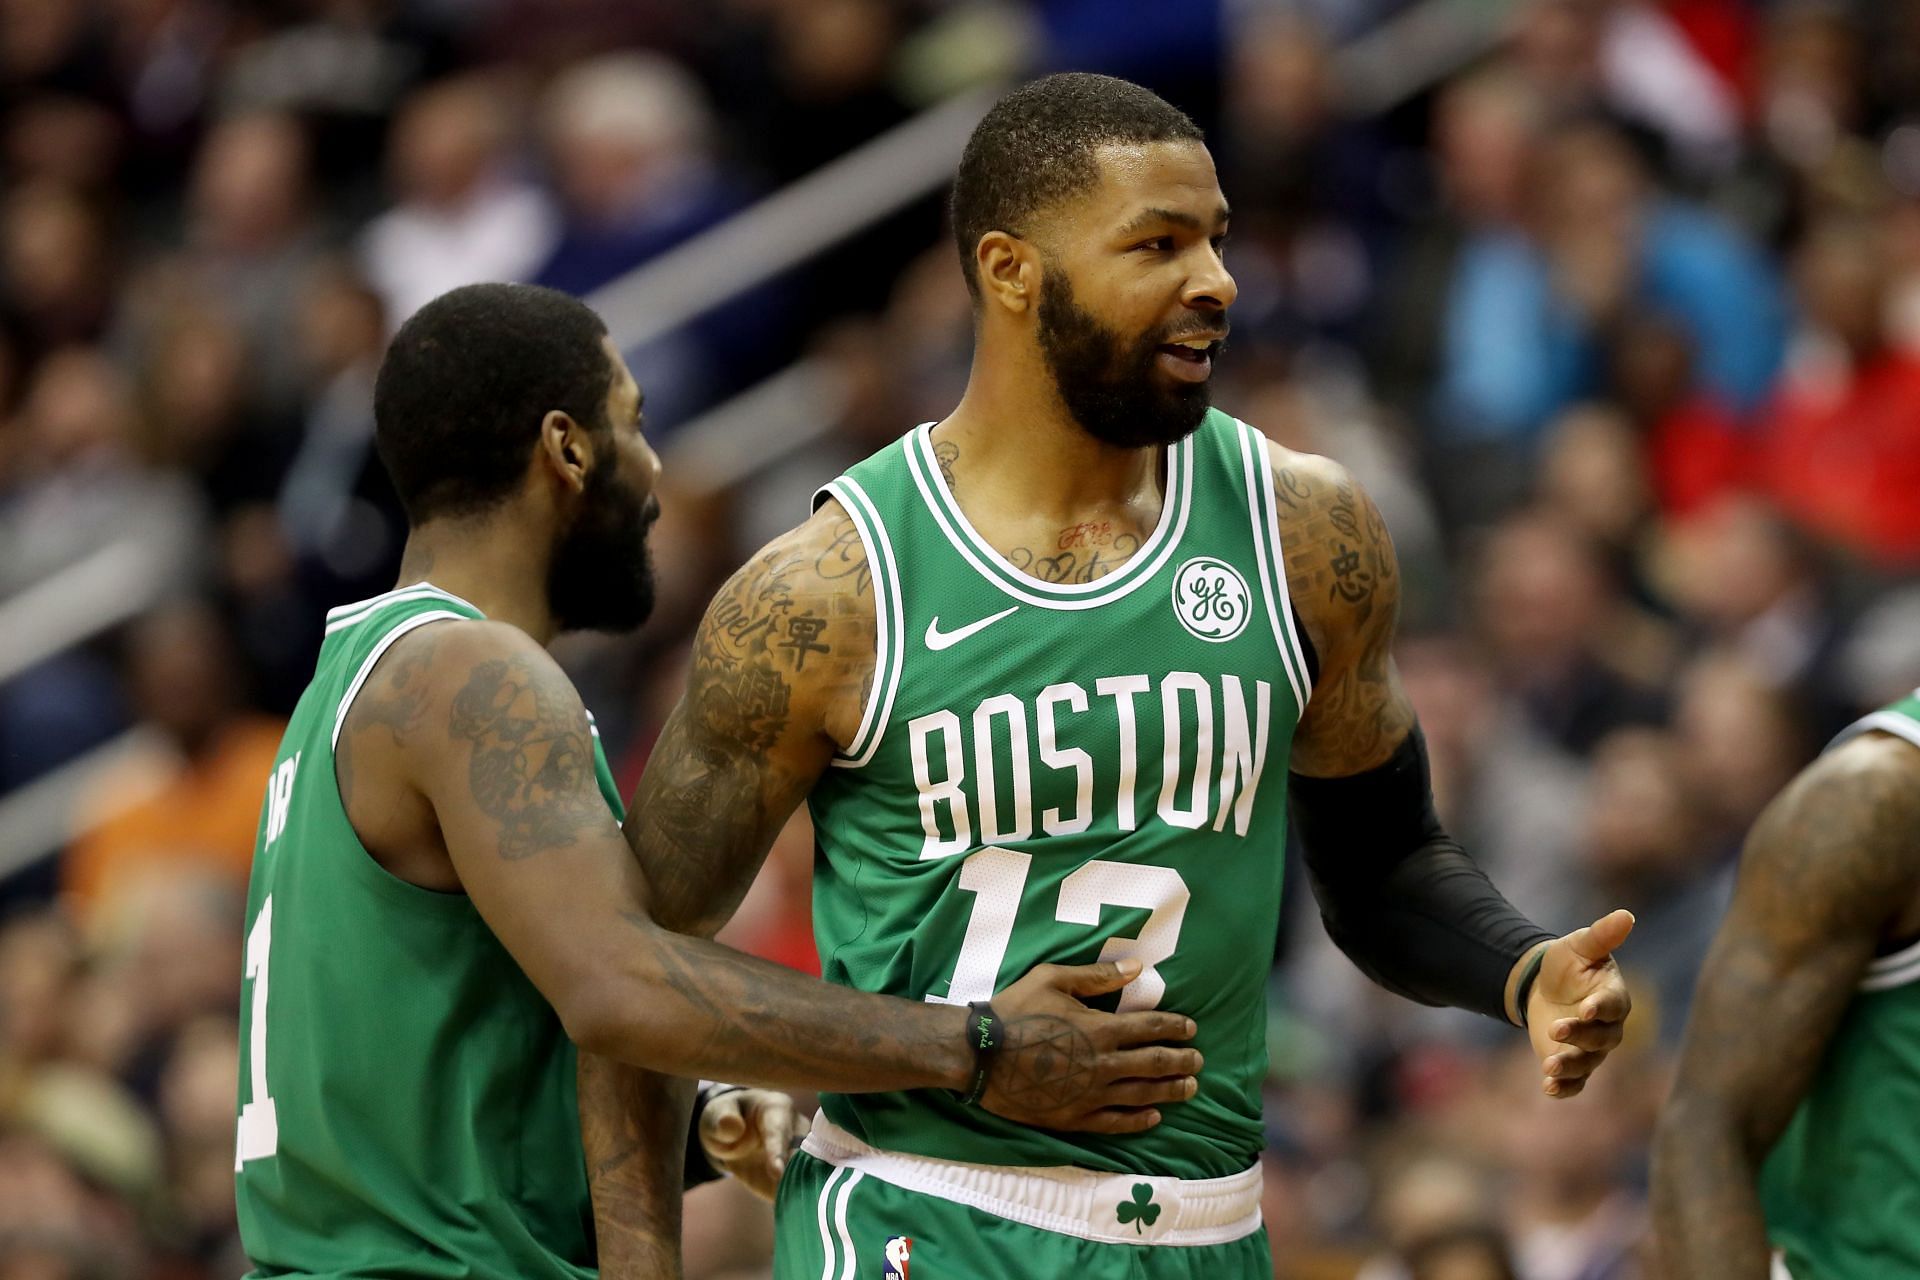 Kyrie Irving and Marcus Morris played together for the Boston Celtics back in 2018